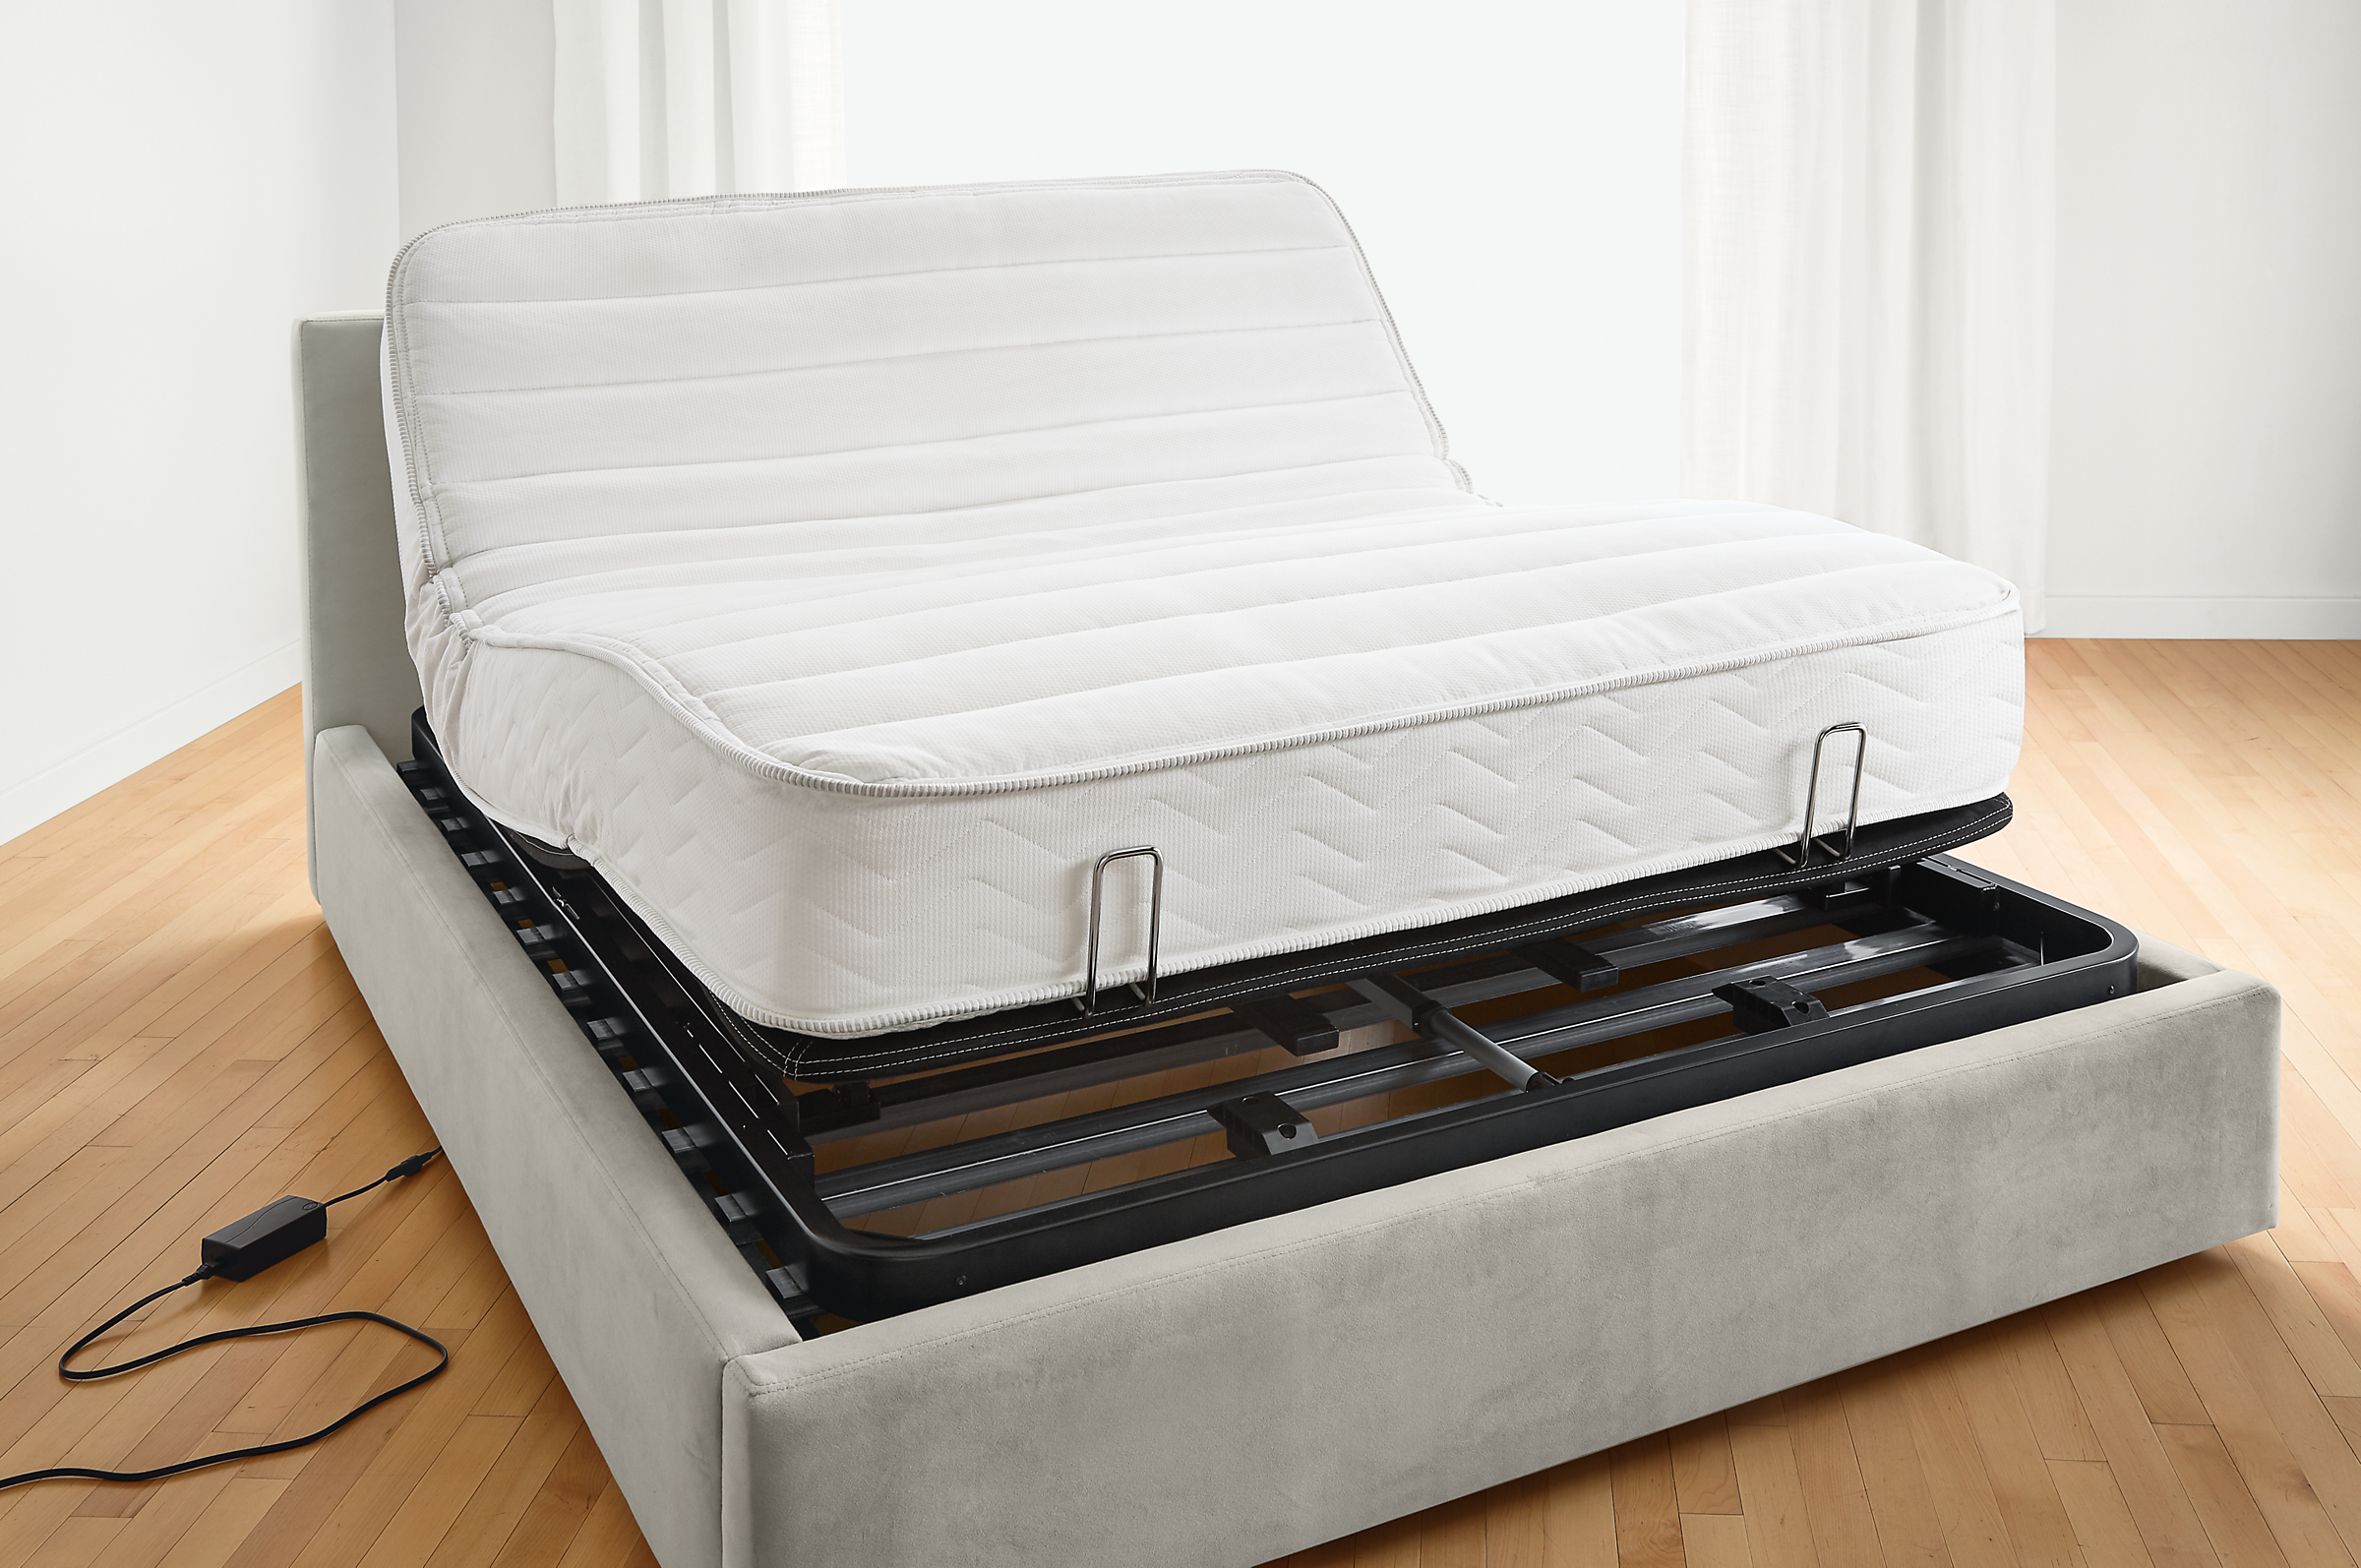 Detail of adjustable bed base with mattress.